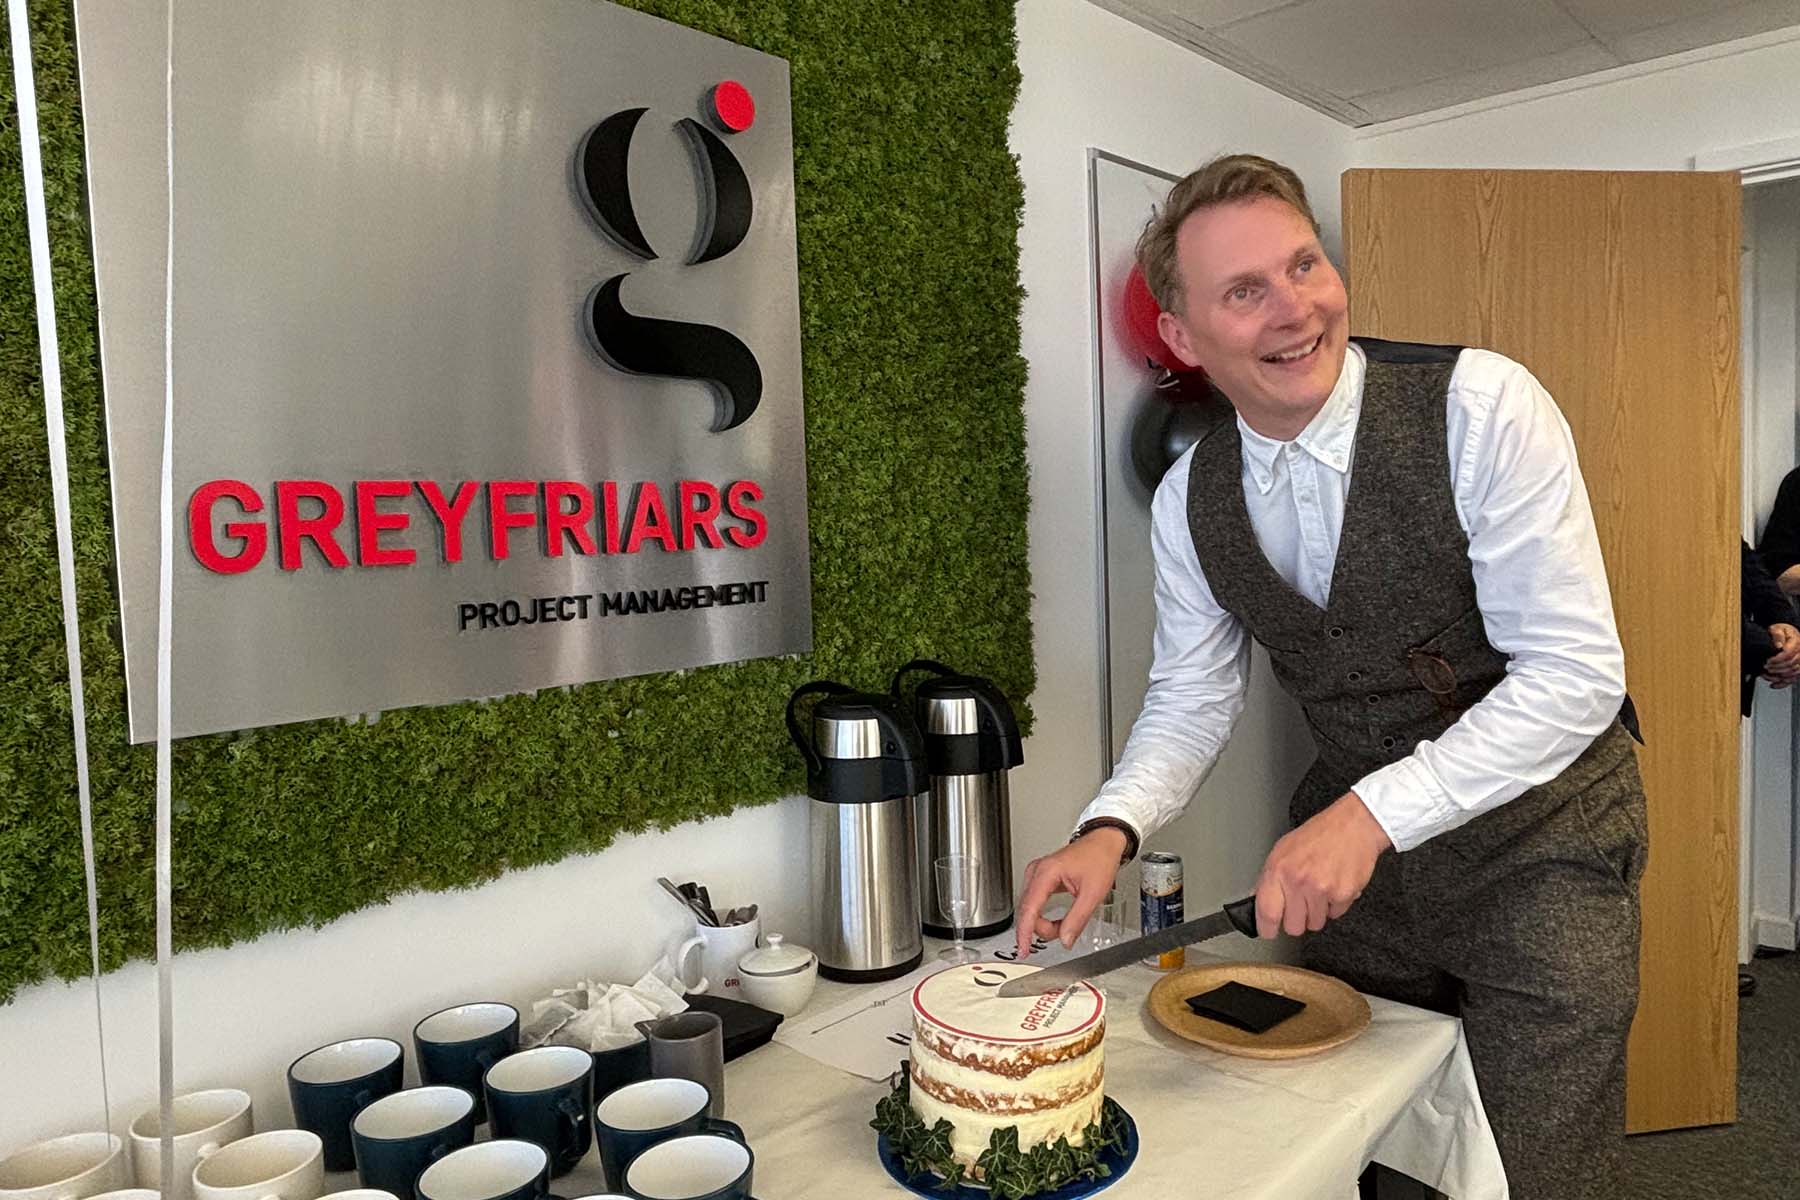 Greyfriars Project Management celebrate opening event for new offices